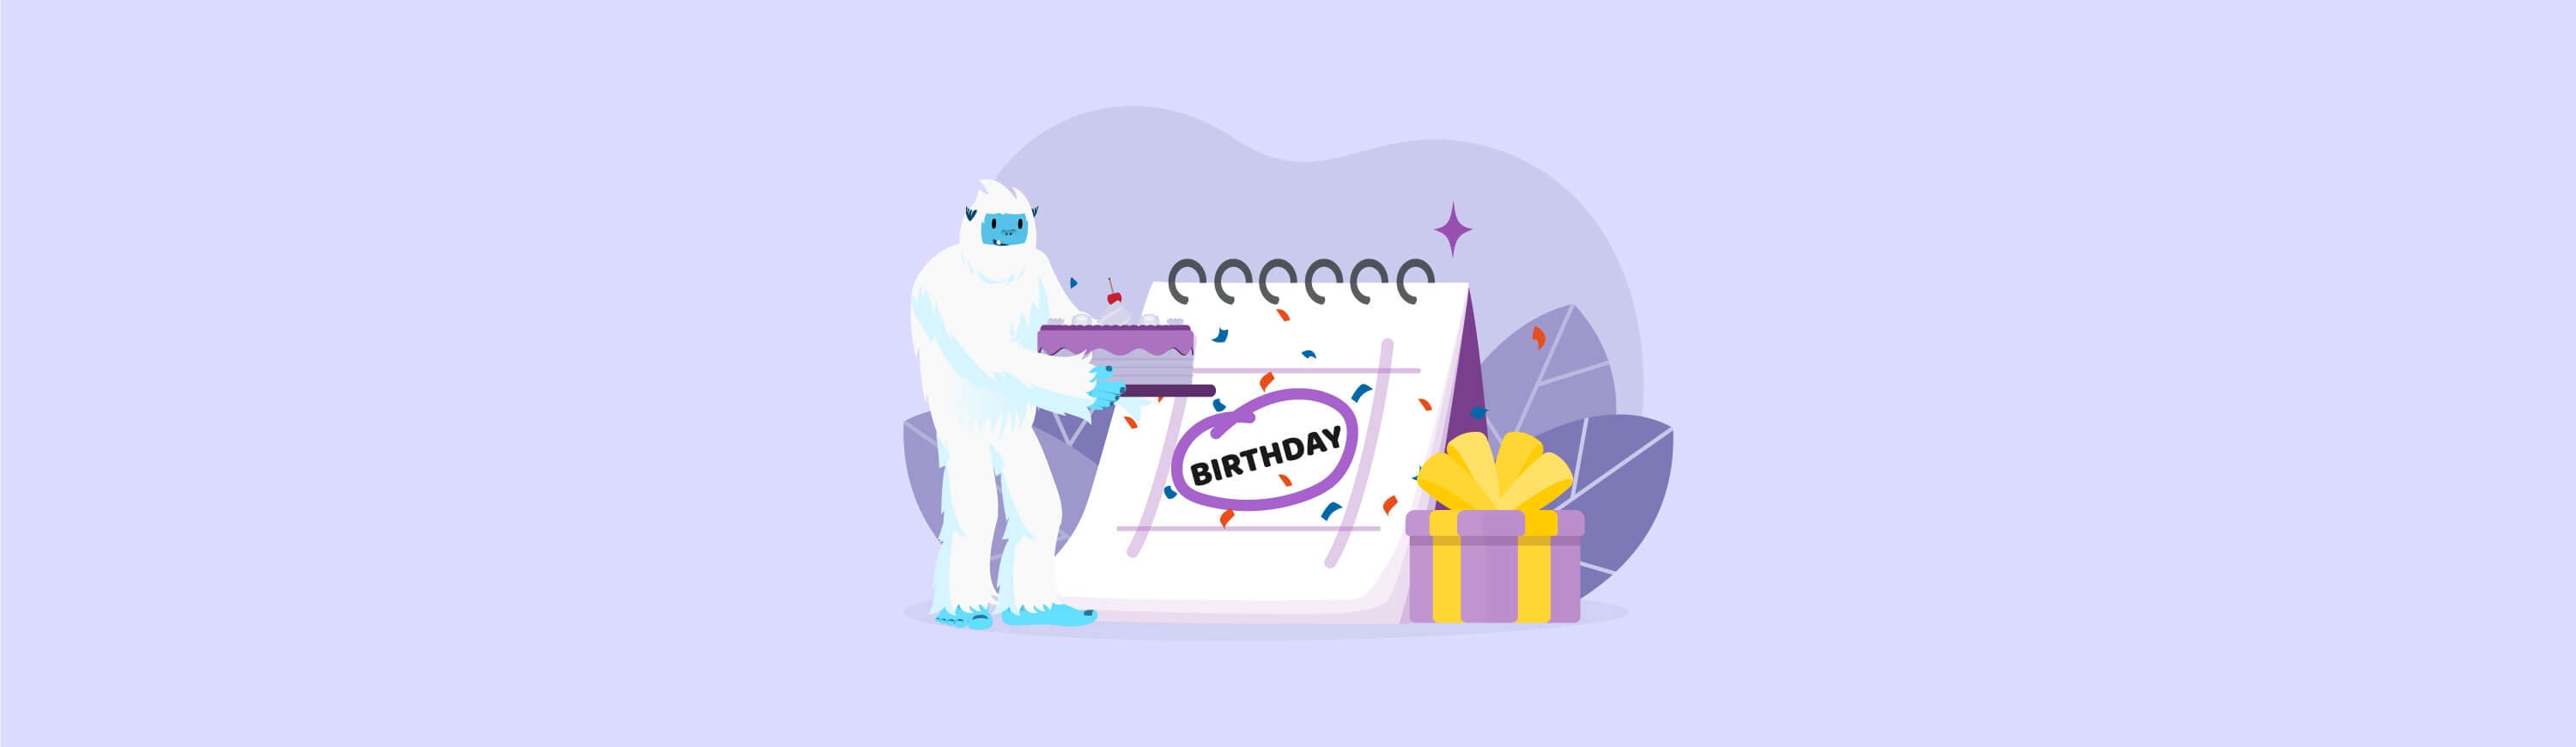 Illustration of Carl the yeti standing next to a calendar with a birthday celebration.